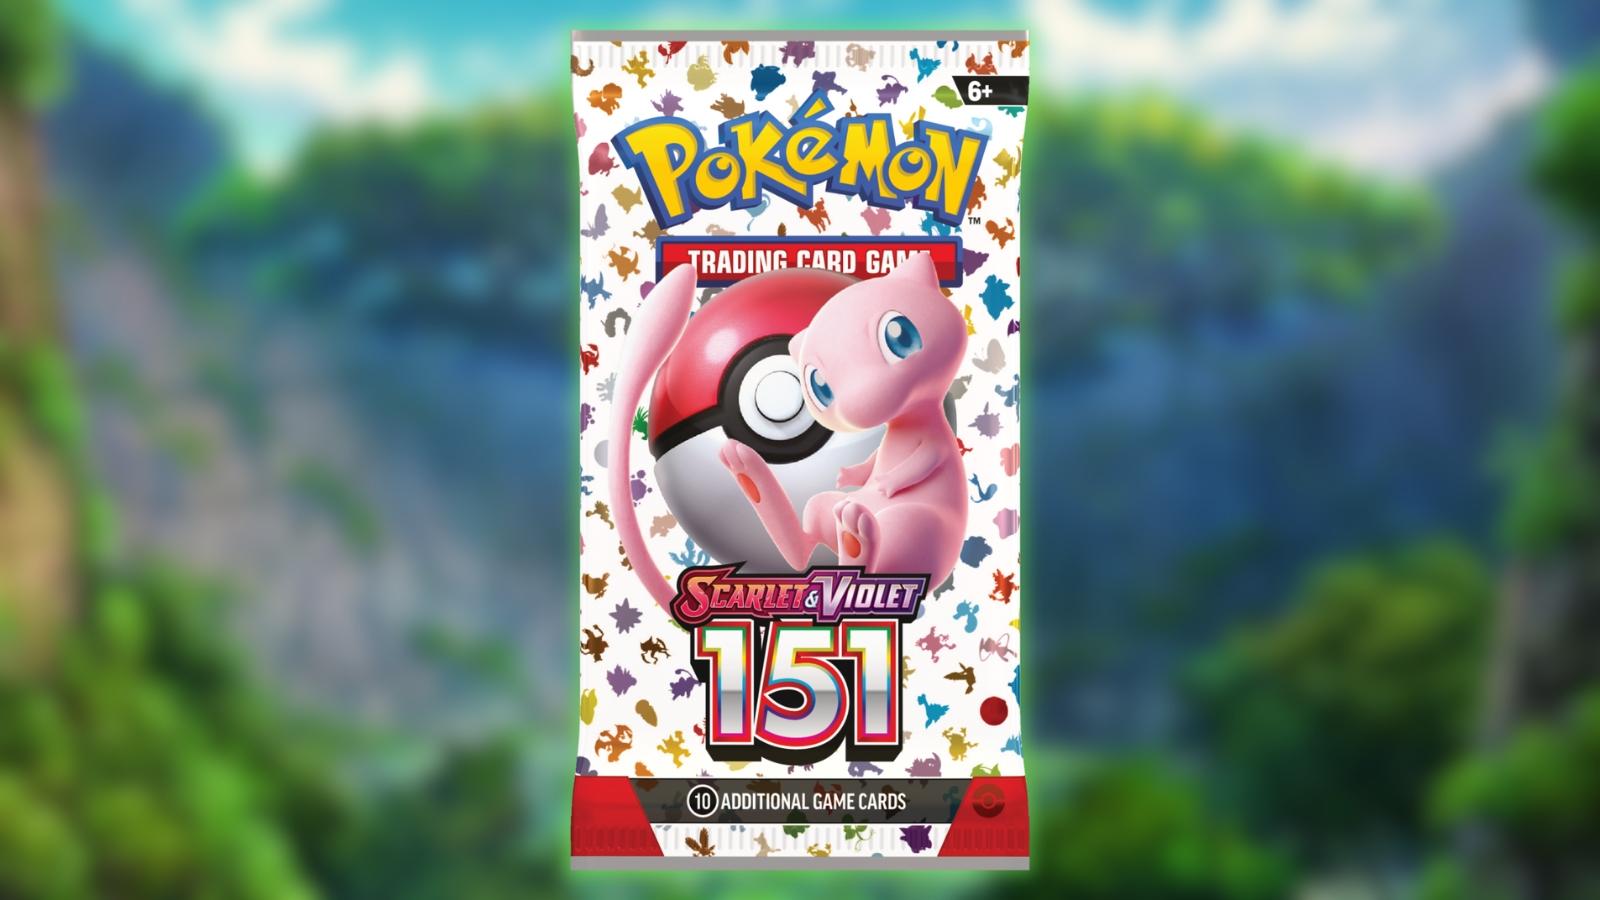 Pokemon Scarlet 151 booster packet with Mew over a forest background